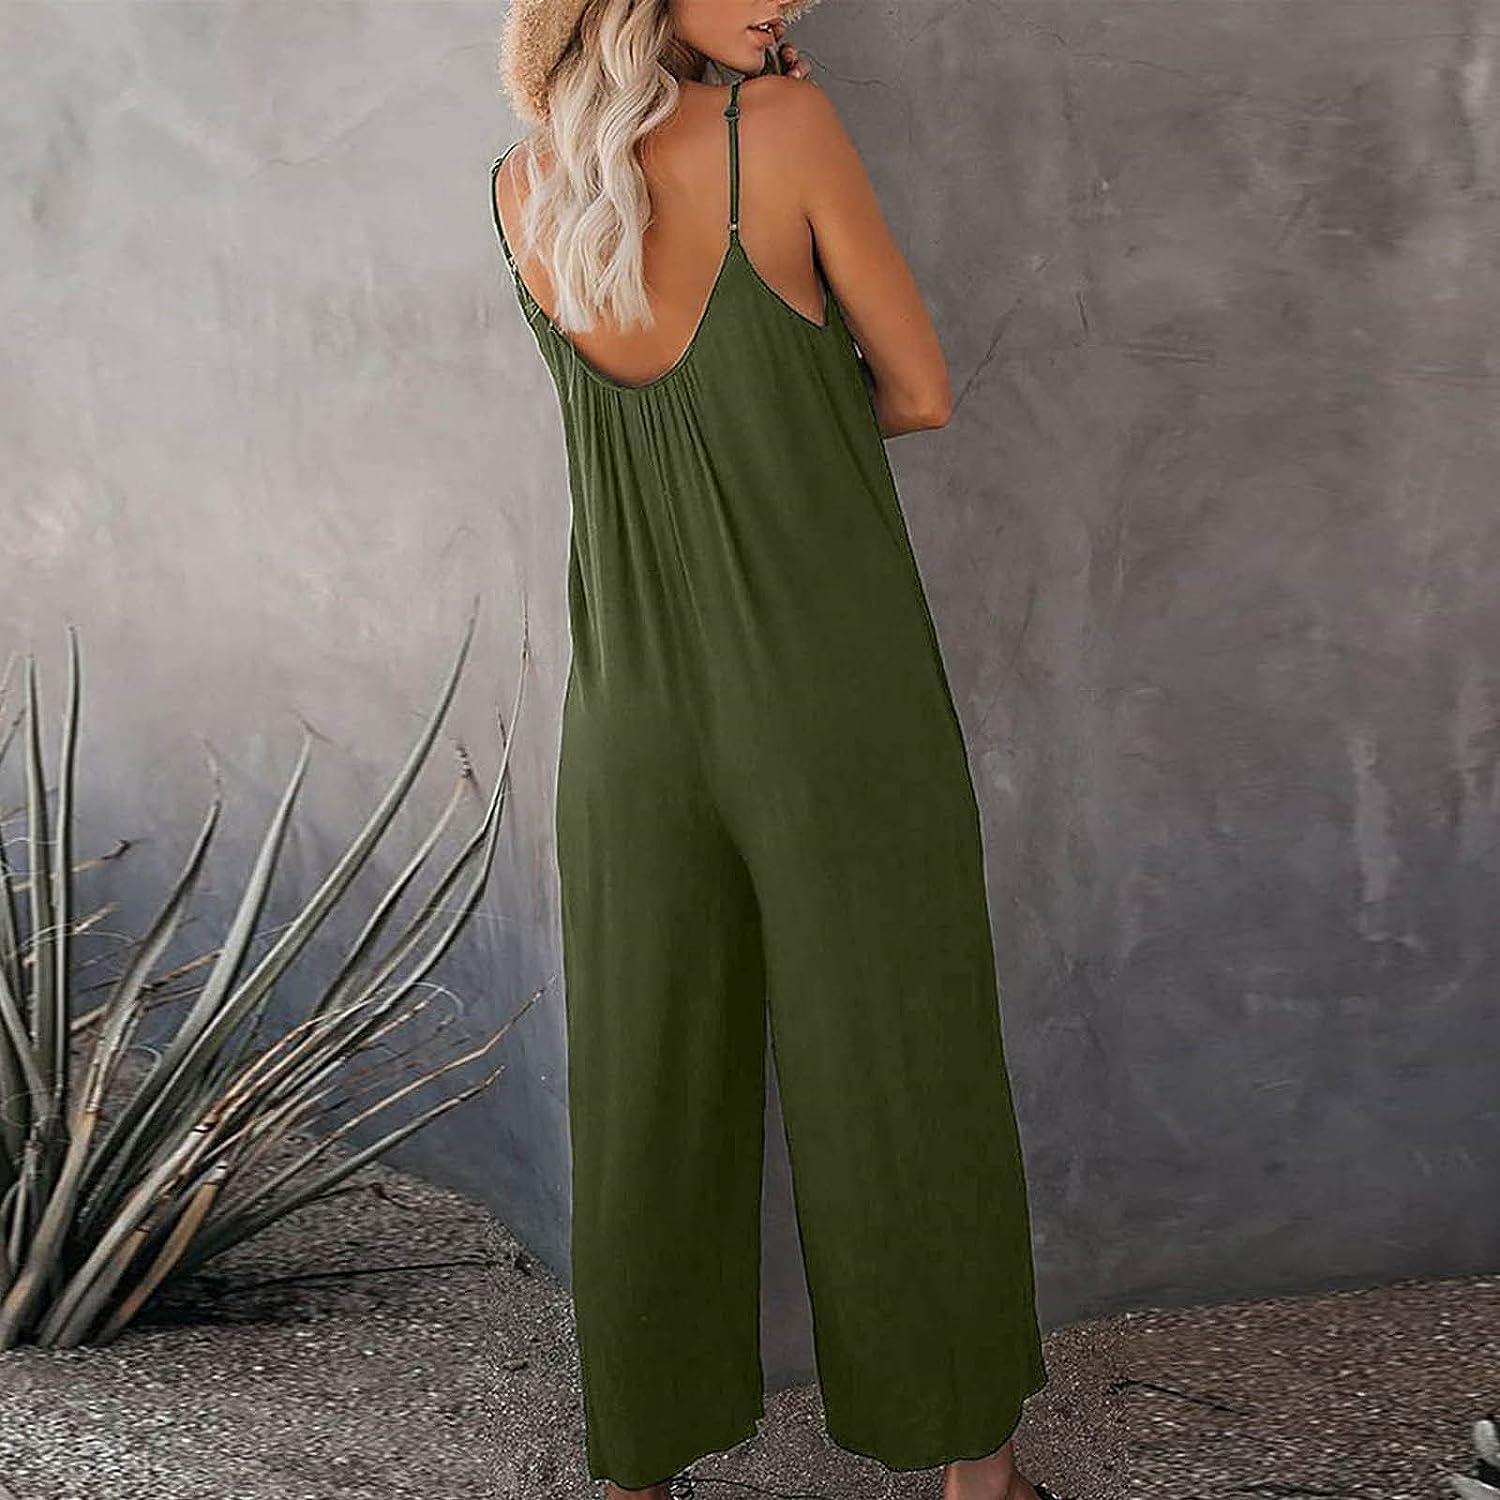 Women Short Jumpsuits Rompers Summer Casual Small Floral Shirt Overalls  Jumpsuit Short Sleeve Wide Leg Loose Jumpsuit